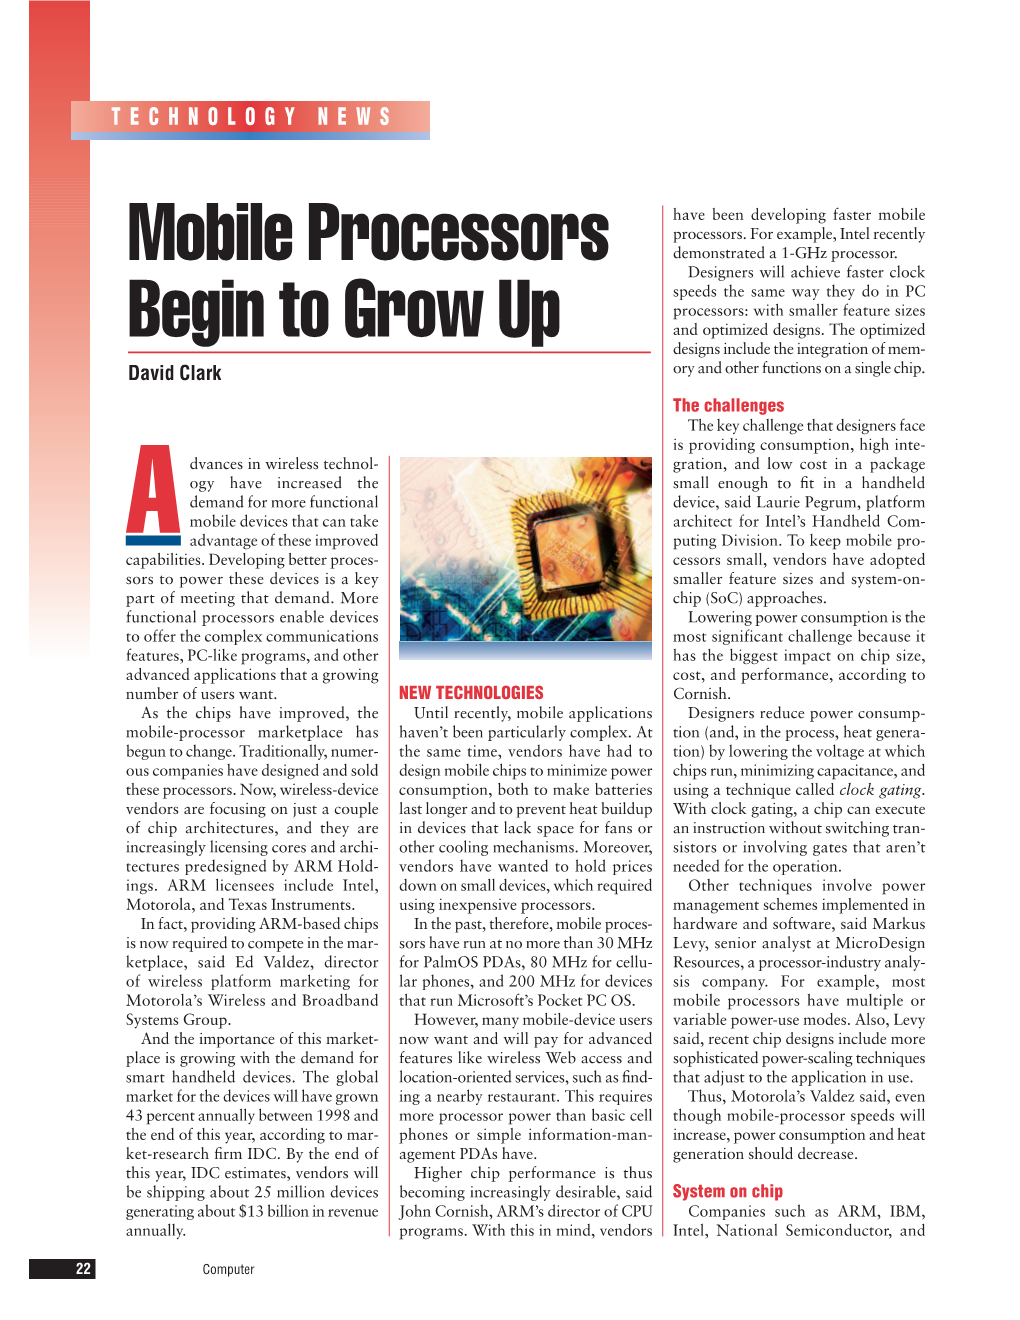 Mobile Processors Begin to Grow Up